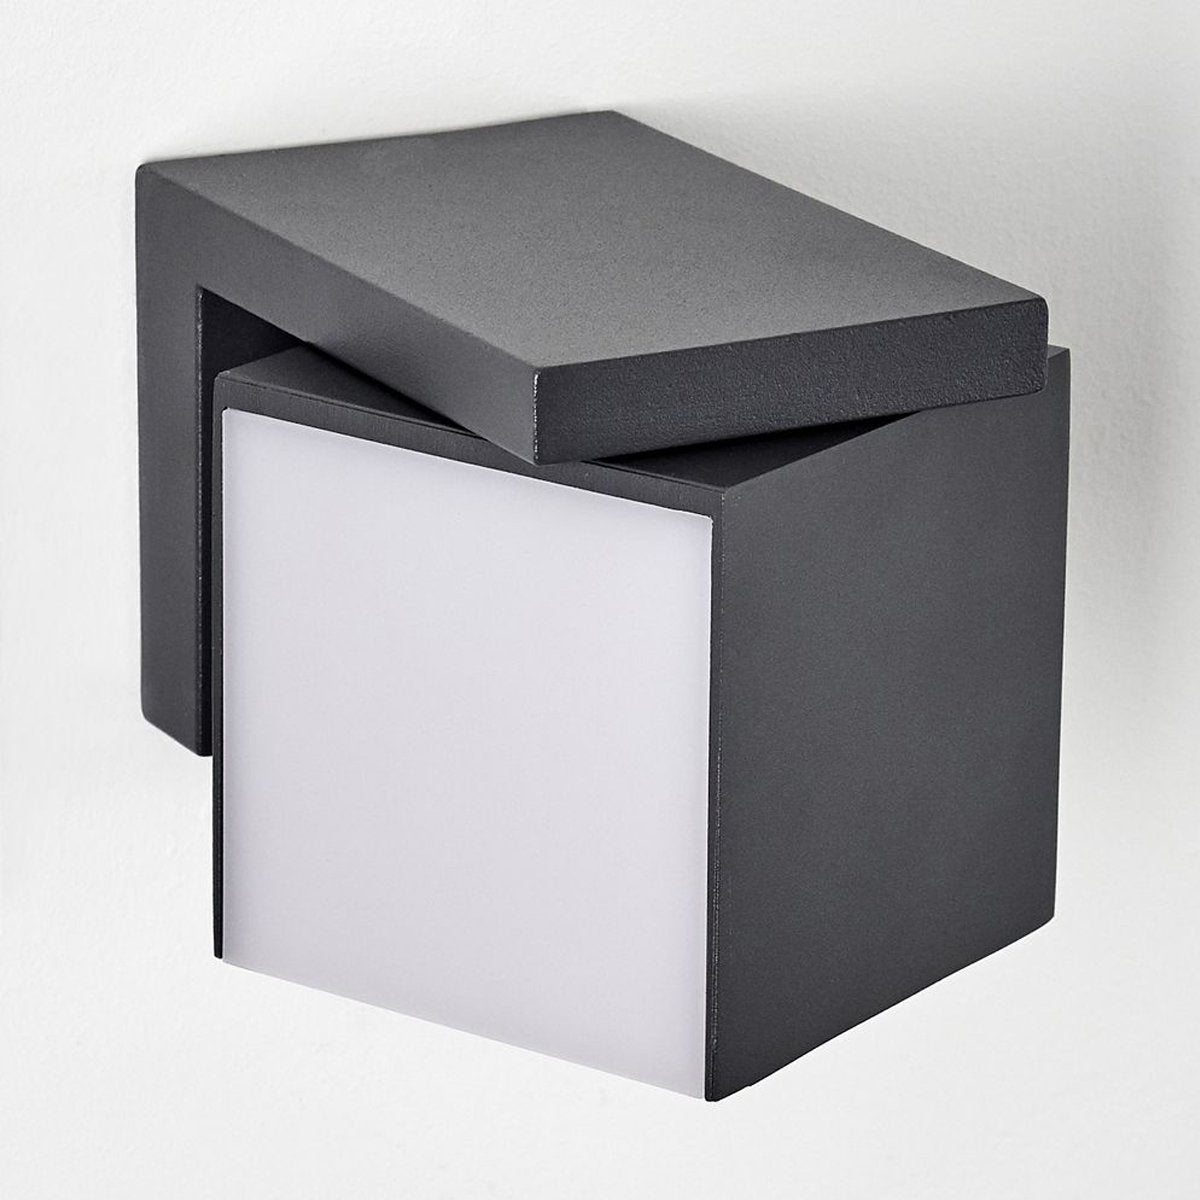 Come browse our Morgan dark grey outdoor wall light by CGC Interiors. This cube light can be mounted onto a wall on your home’s exterior space, creating an atmospheric lighting system for your garden, front door, or even on your driveway to provide an extra security solution. 